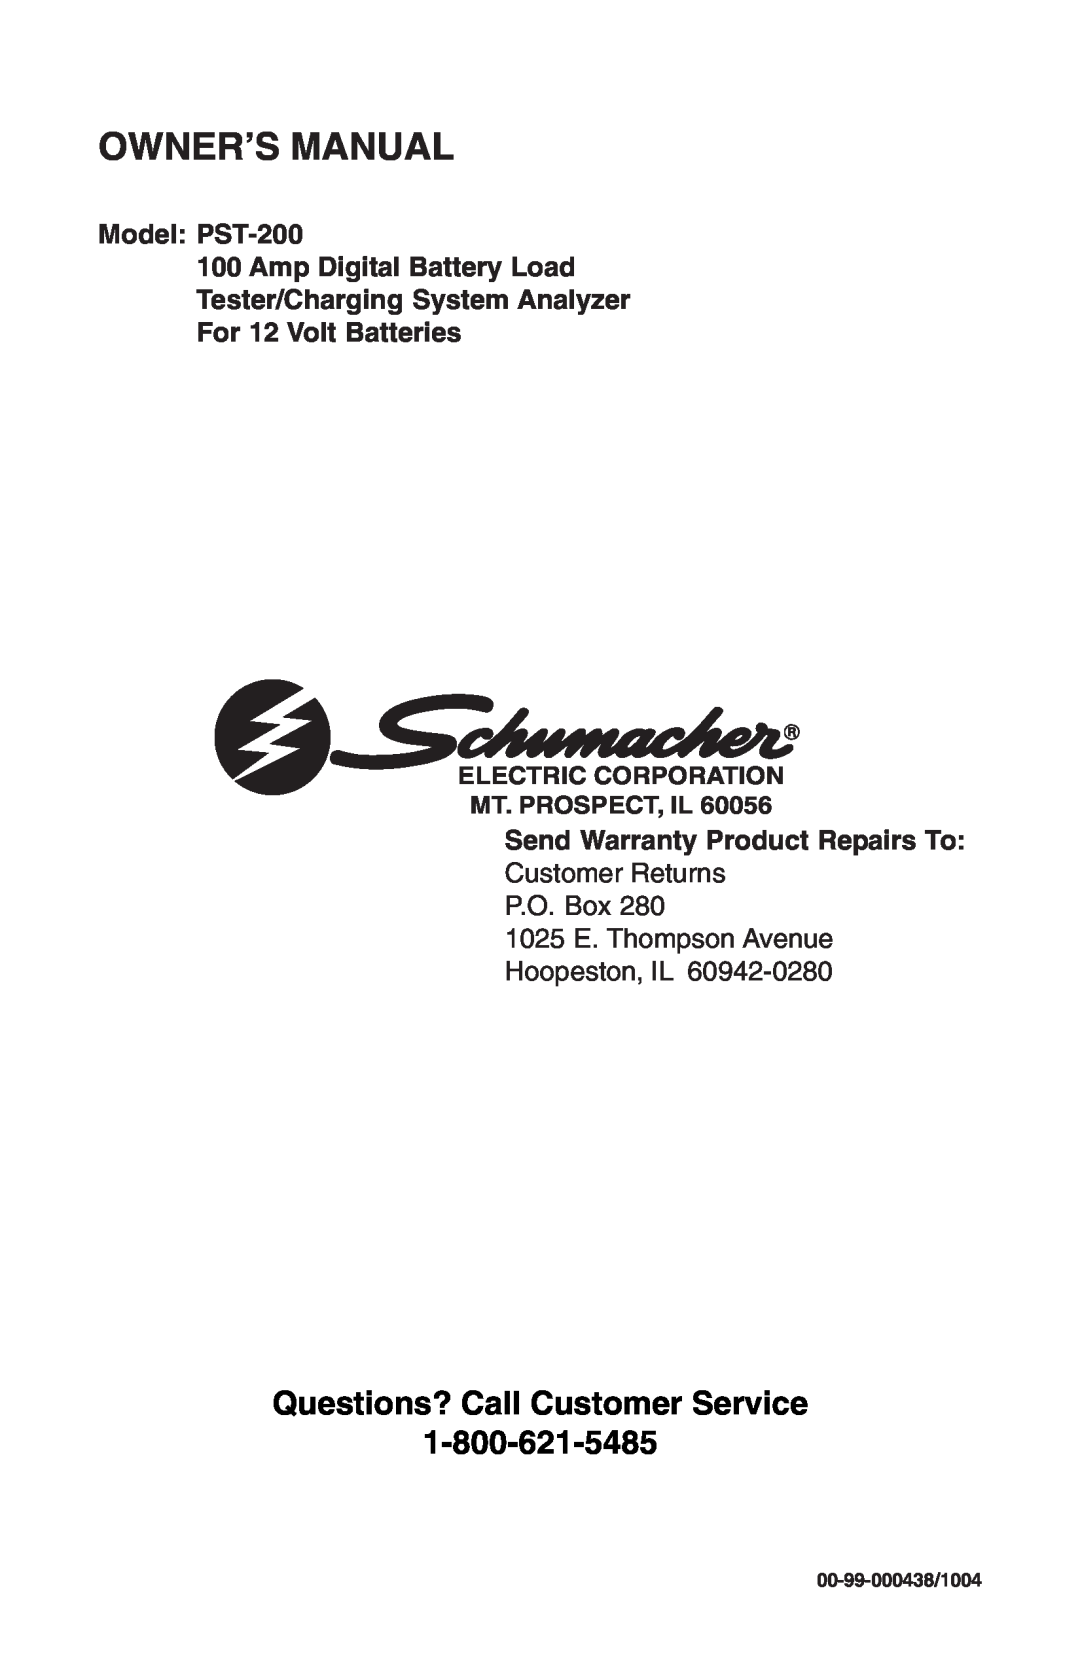 Schumacher PST-200 owner manual Electric Corporation Mt. Prospect, Il, Owner’S Manual, Questions? Call Customer Service 